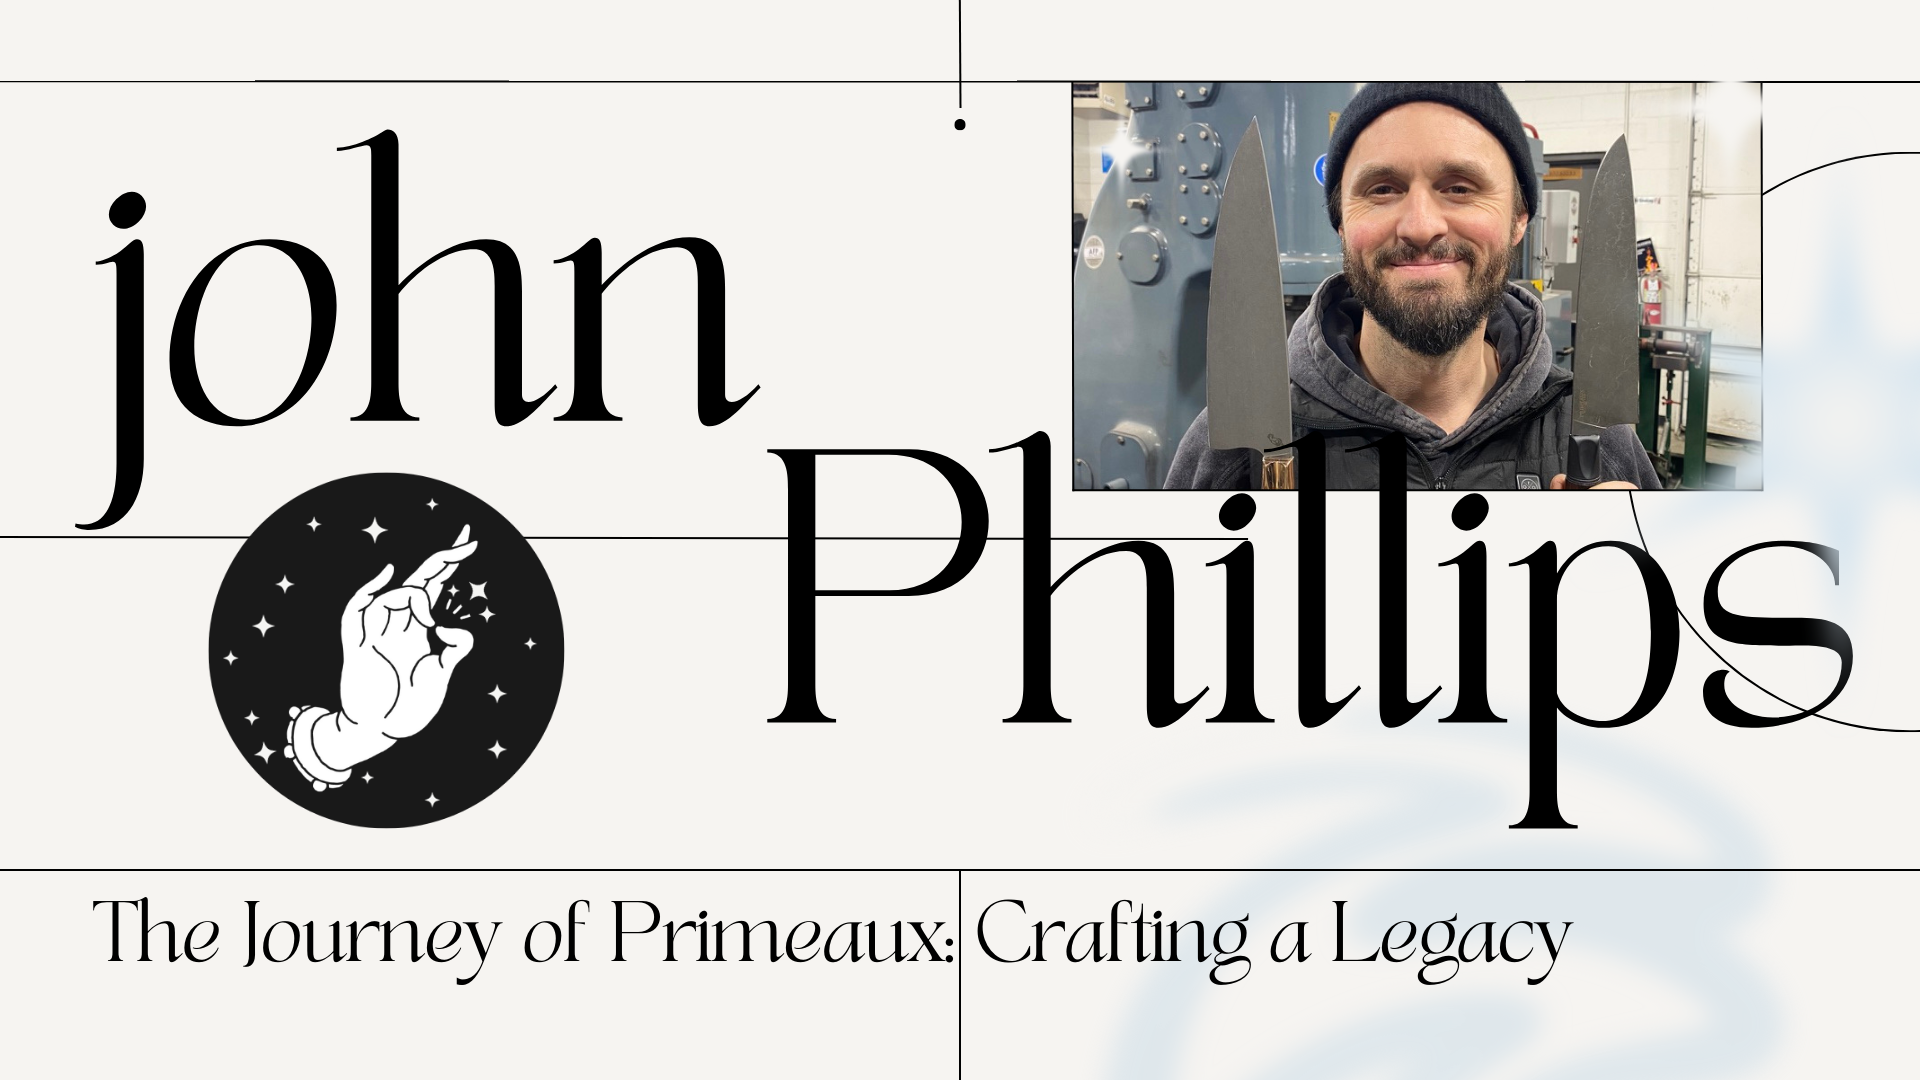 The Journey of Primeaux: Crafting a Legacy